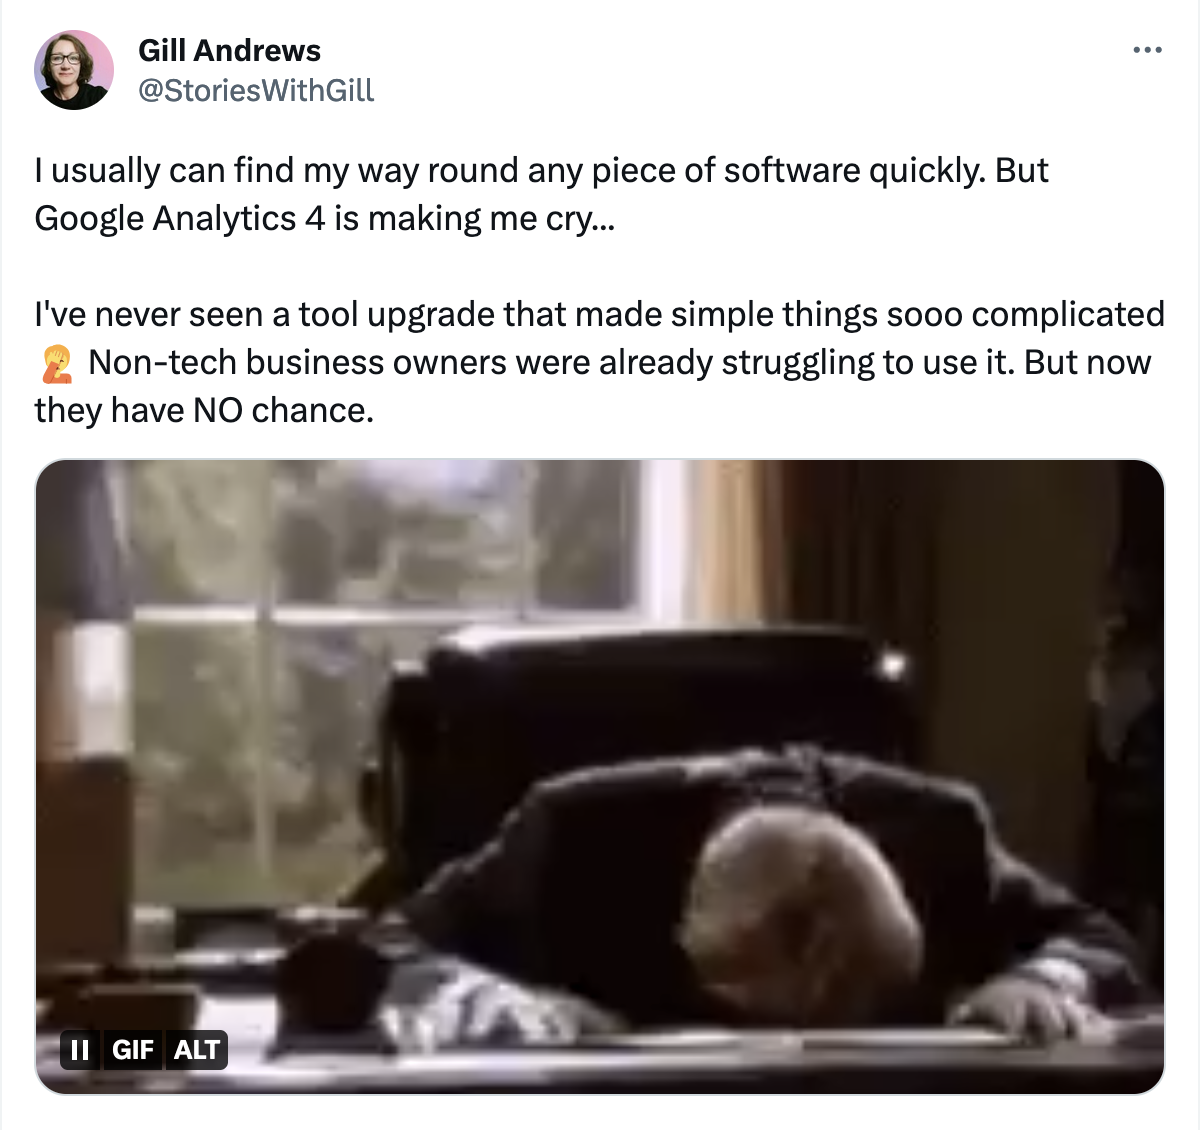 A critical tweet about Google Analytics 4 by Gill Andrews